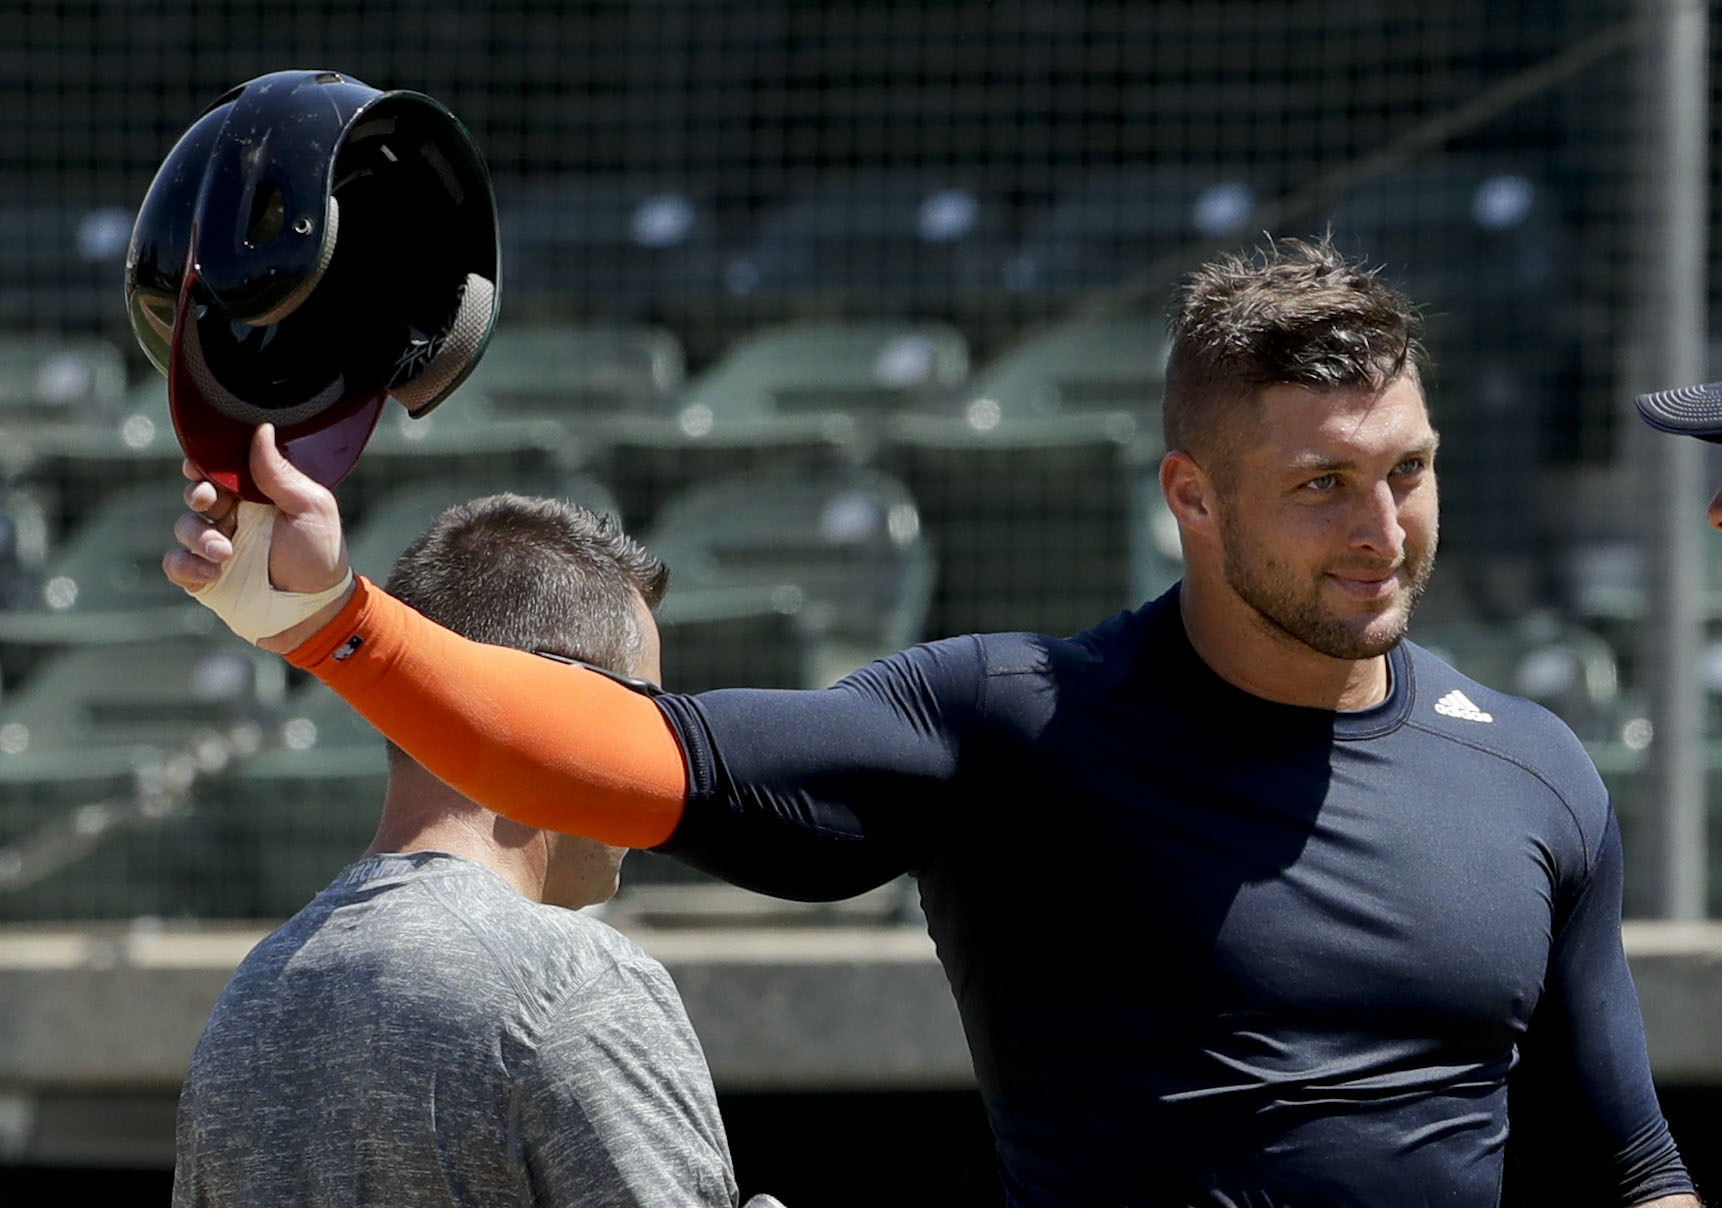 Former NFL quarterback Tim Tebow finishes his work out for baseball scouts and the media in Los Angeles on August 30, 2016. (Chris Carlson—AP)